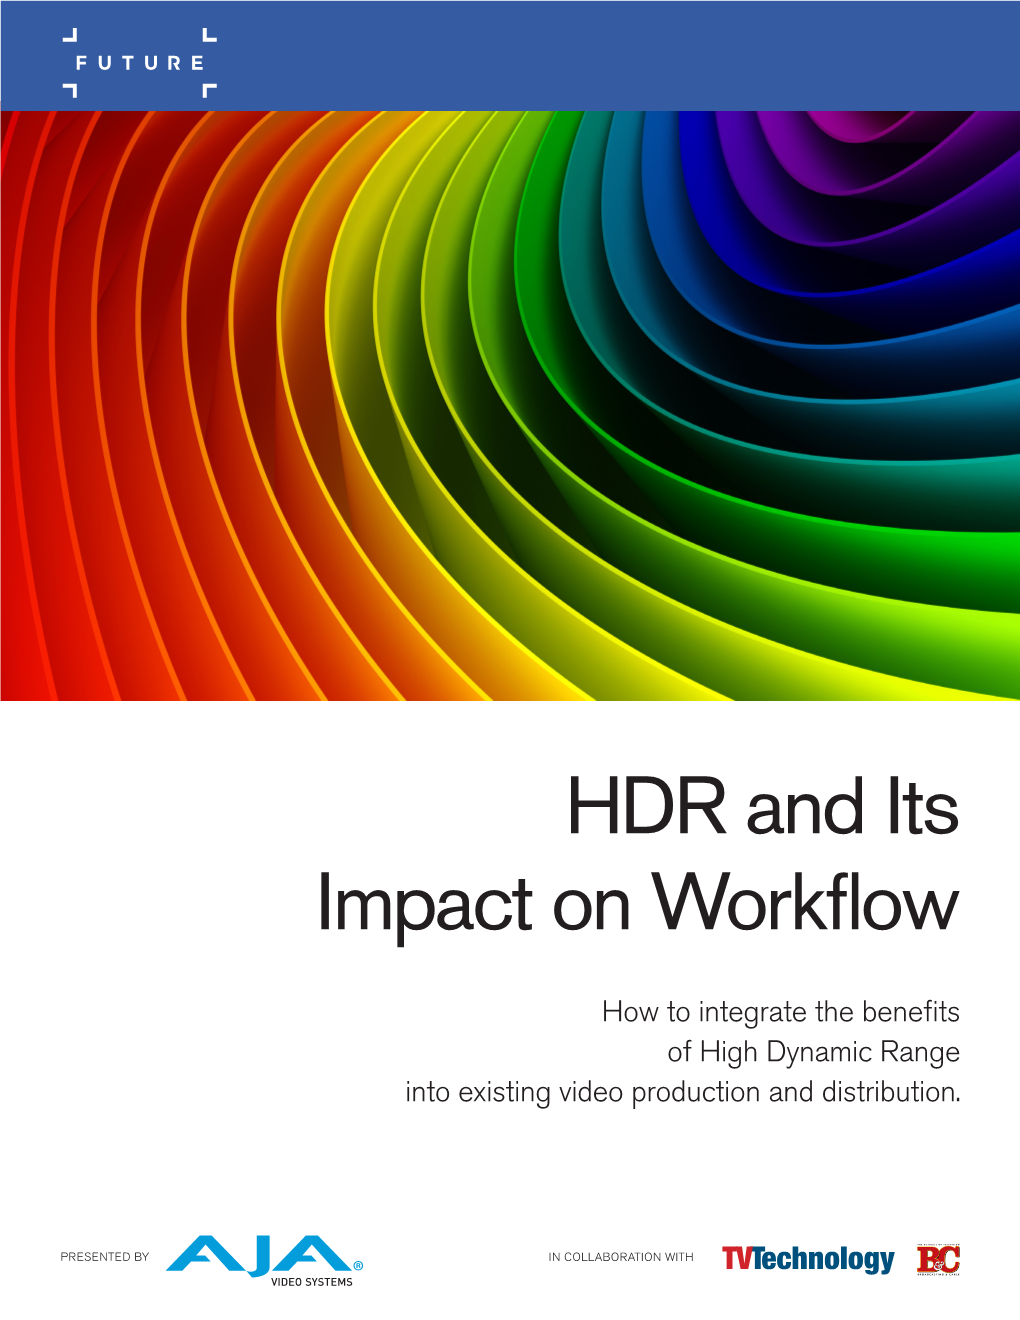 HDR and Its Impact on Workflow